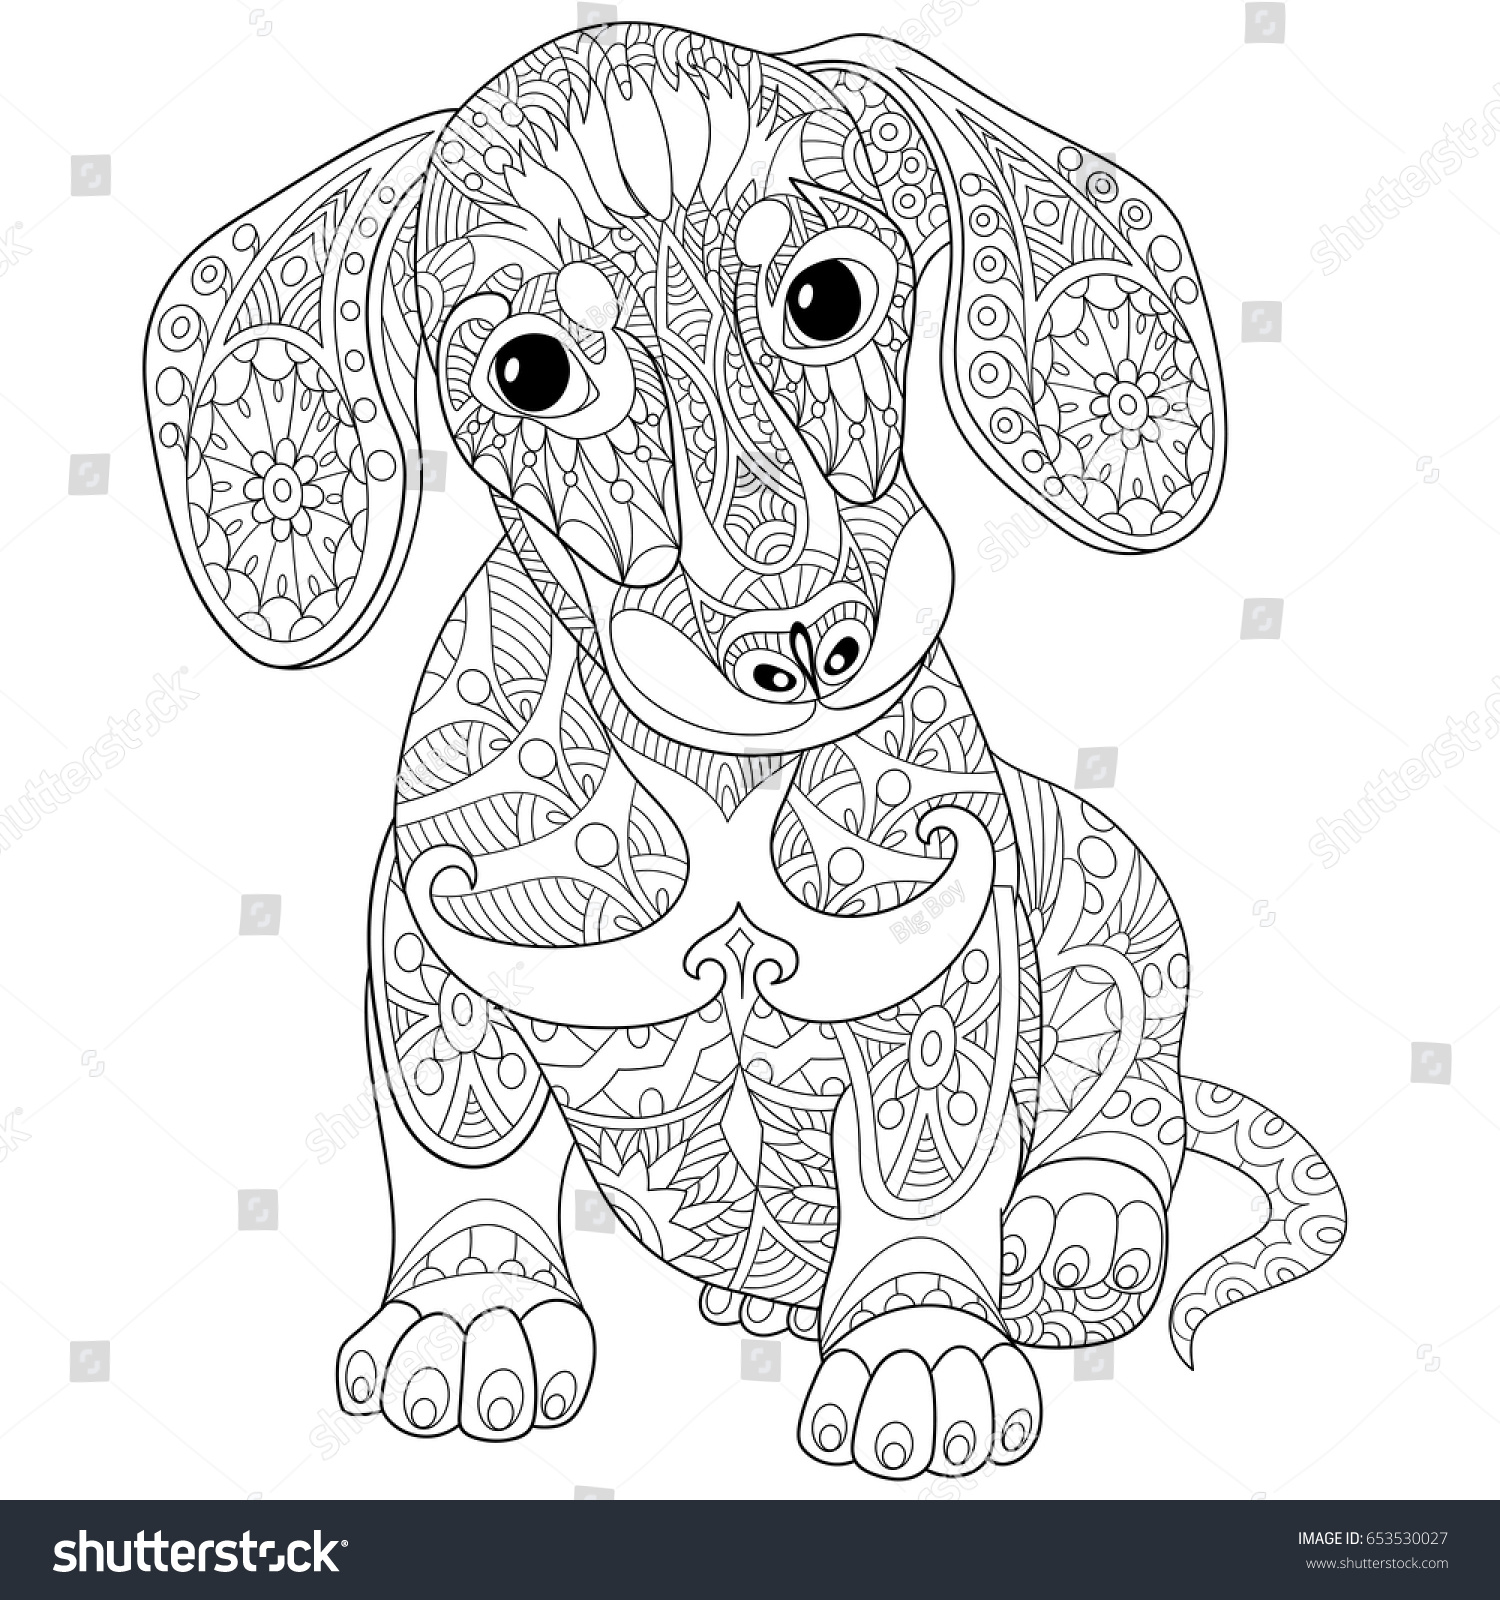 Download Coloring Page Dachshund Puppy Dog Symbol Stock Vector 653530027 - Shutterstock